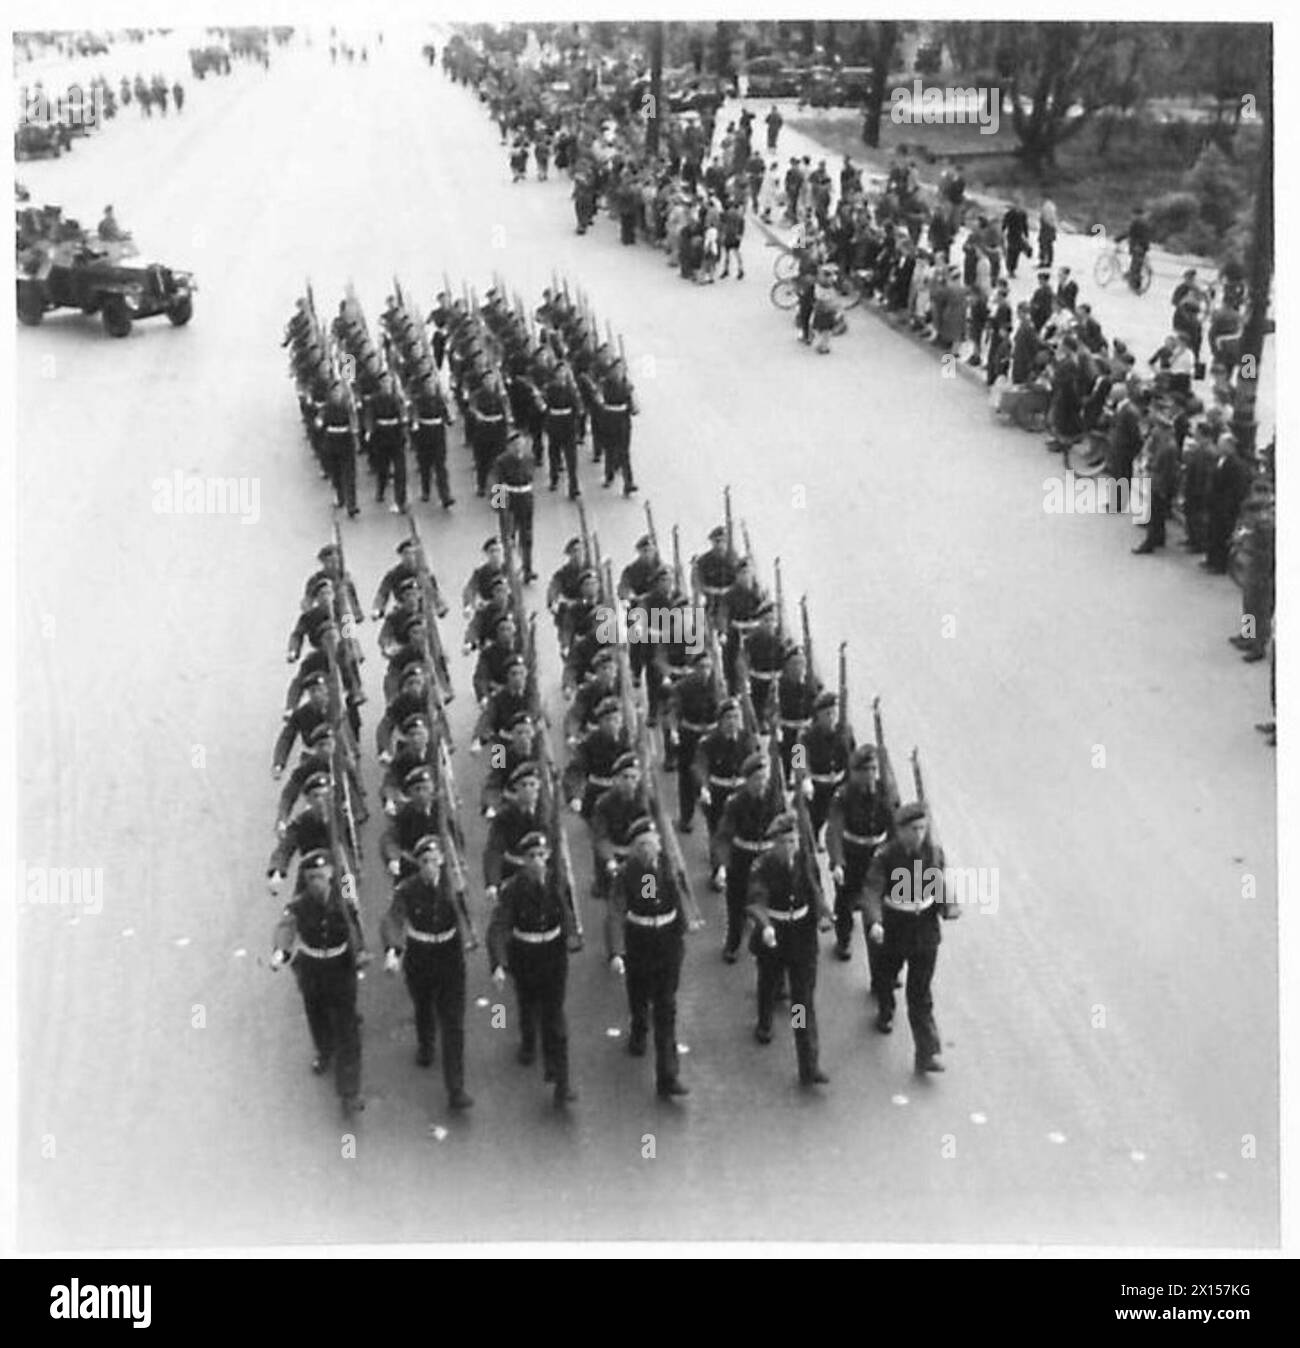 BRITISH VICTORY PARADE IN BERLIN - Scenes in the Charlottenburger Chausse during the march past British Army, 21st Army Group Stock Photo